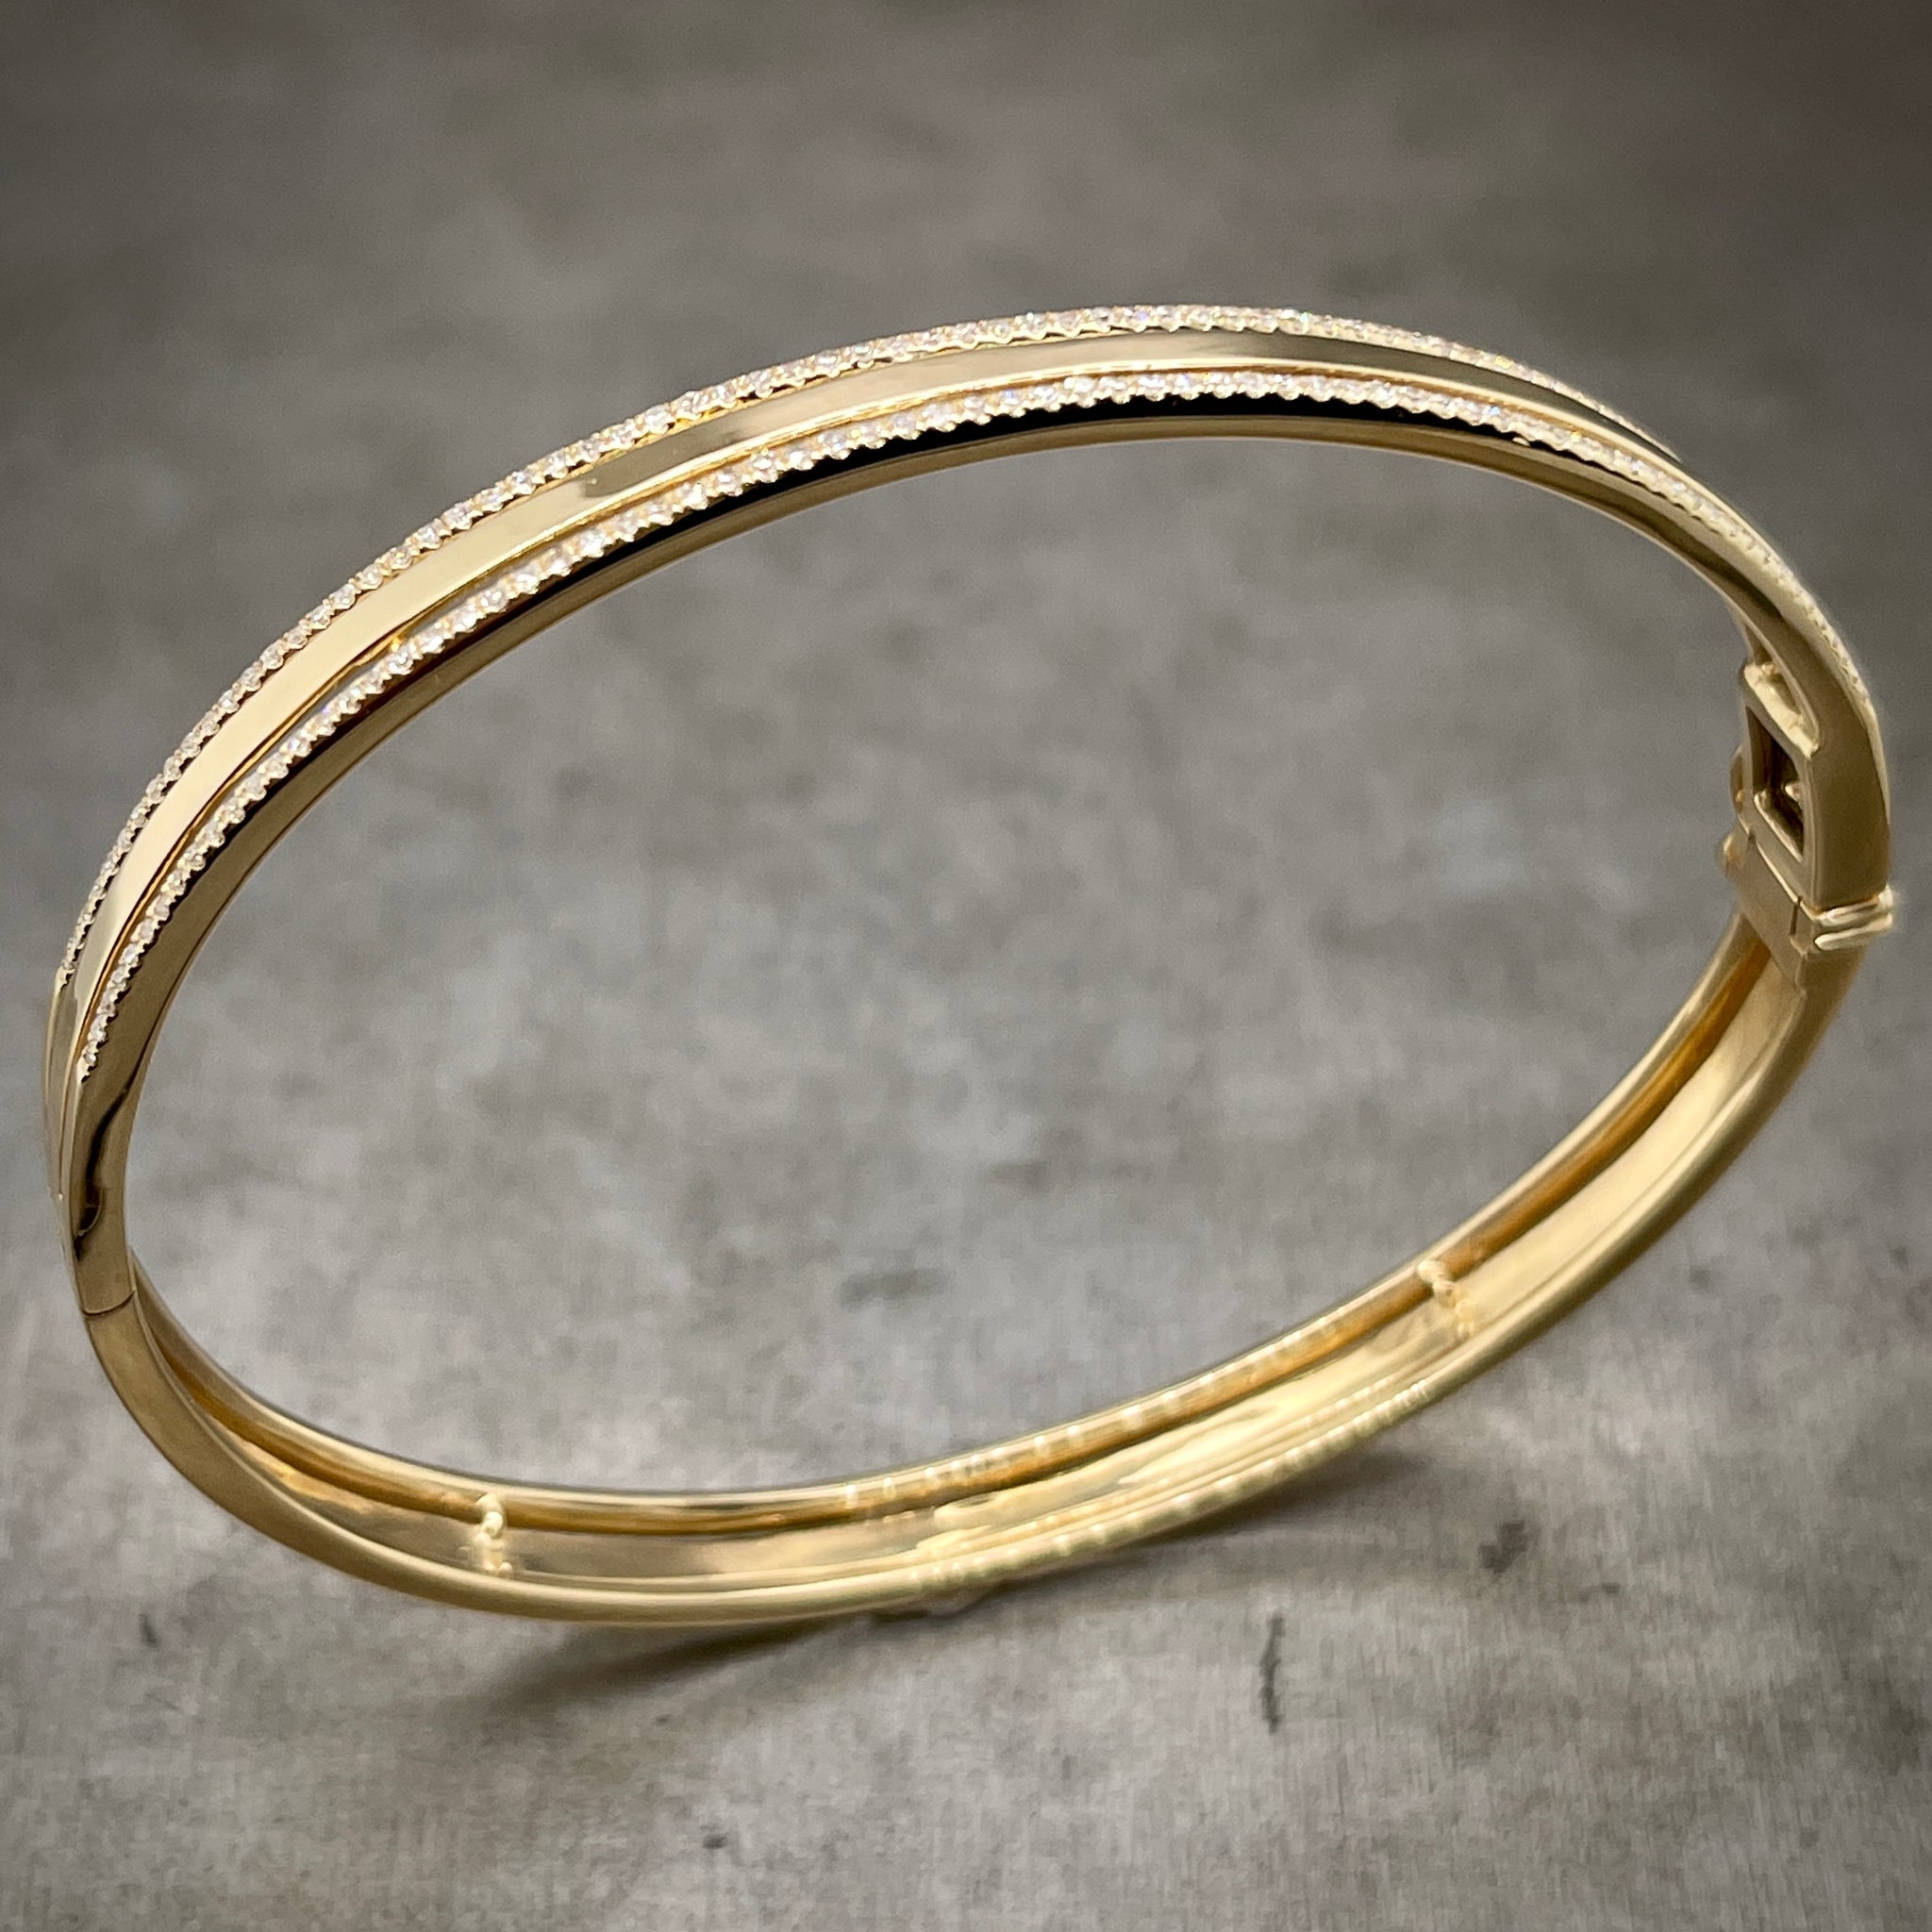 Full view of yellow gold and diamond bangle standing up.